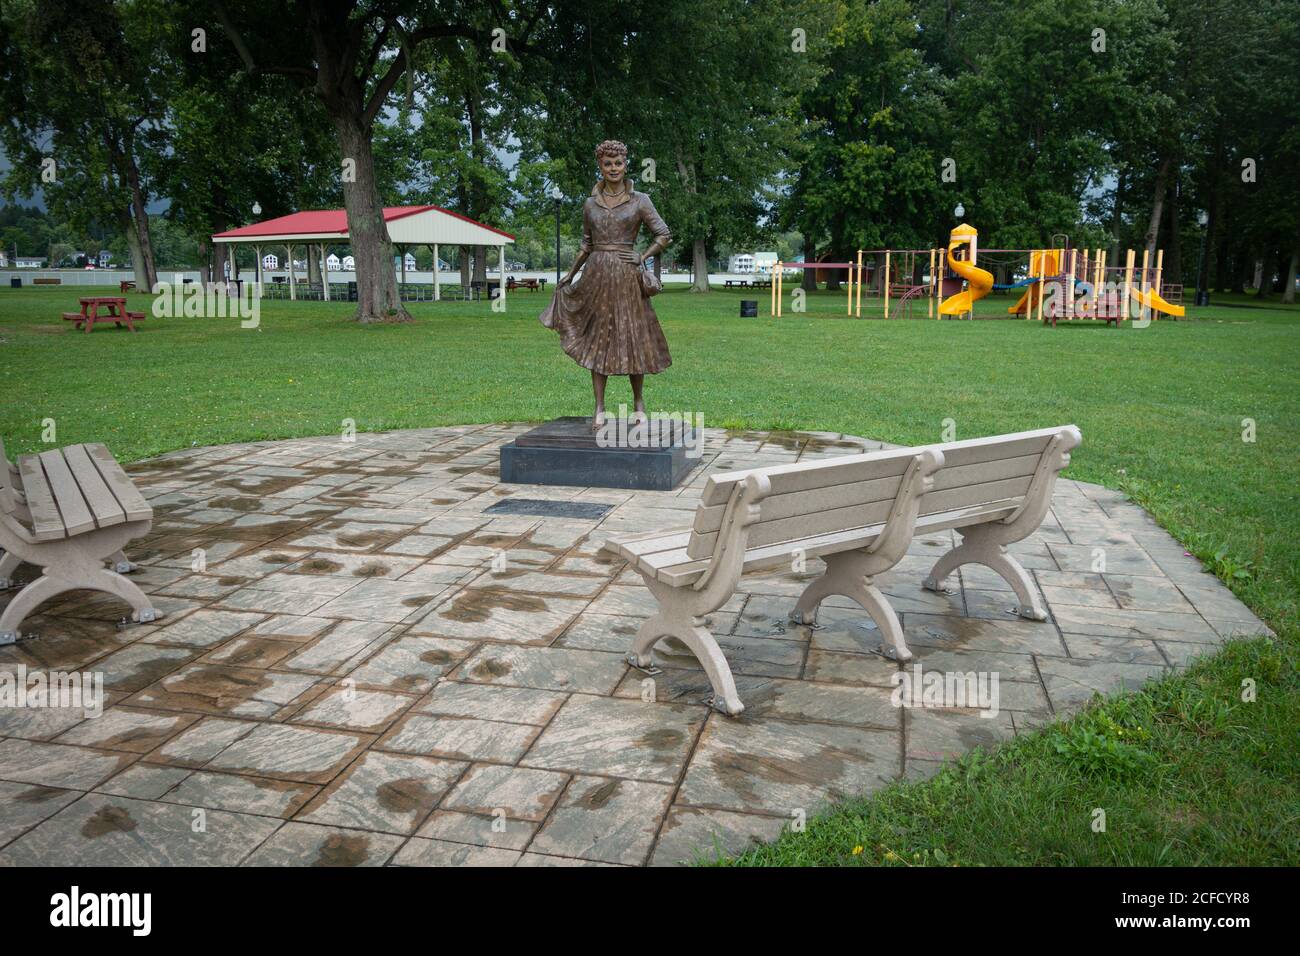 Bronze Statue of comedienne Lucille Ball by artist Carolyn Palmer, Lucille Ball Memorial Park, Celeron, NY, USA Stock Photo